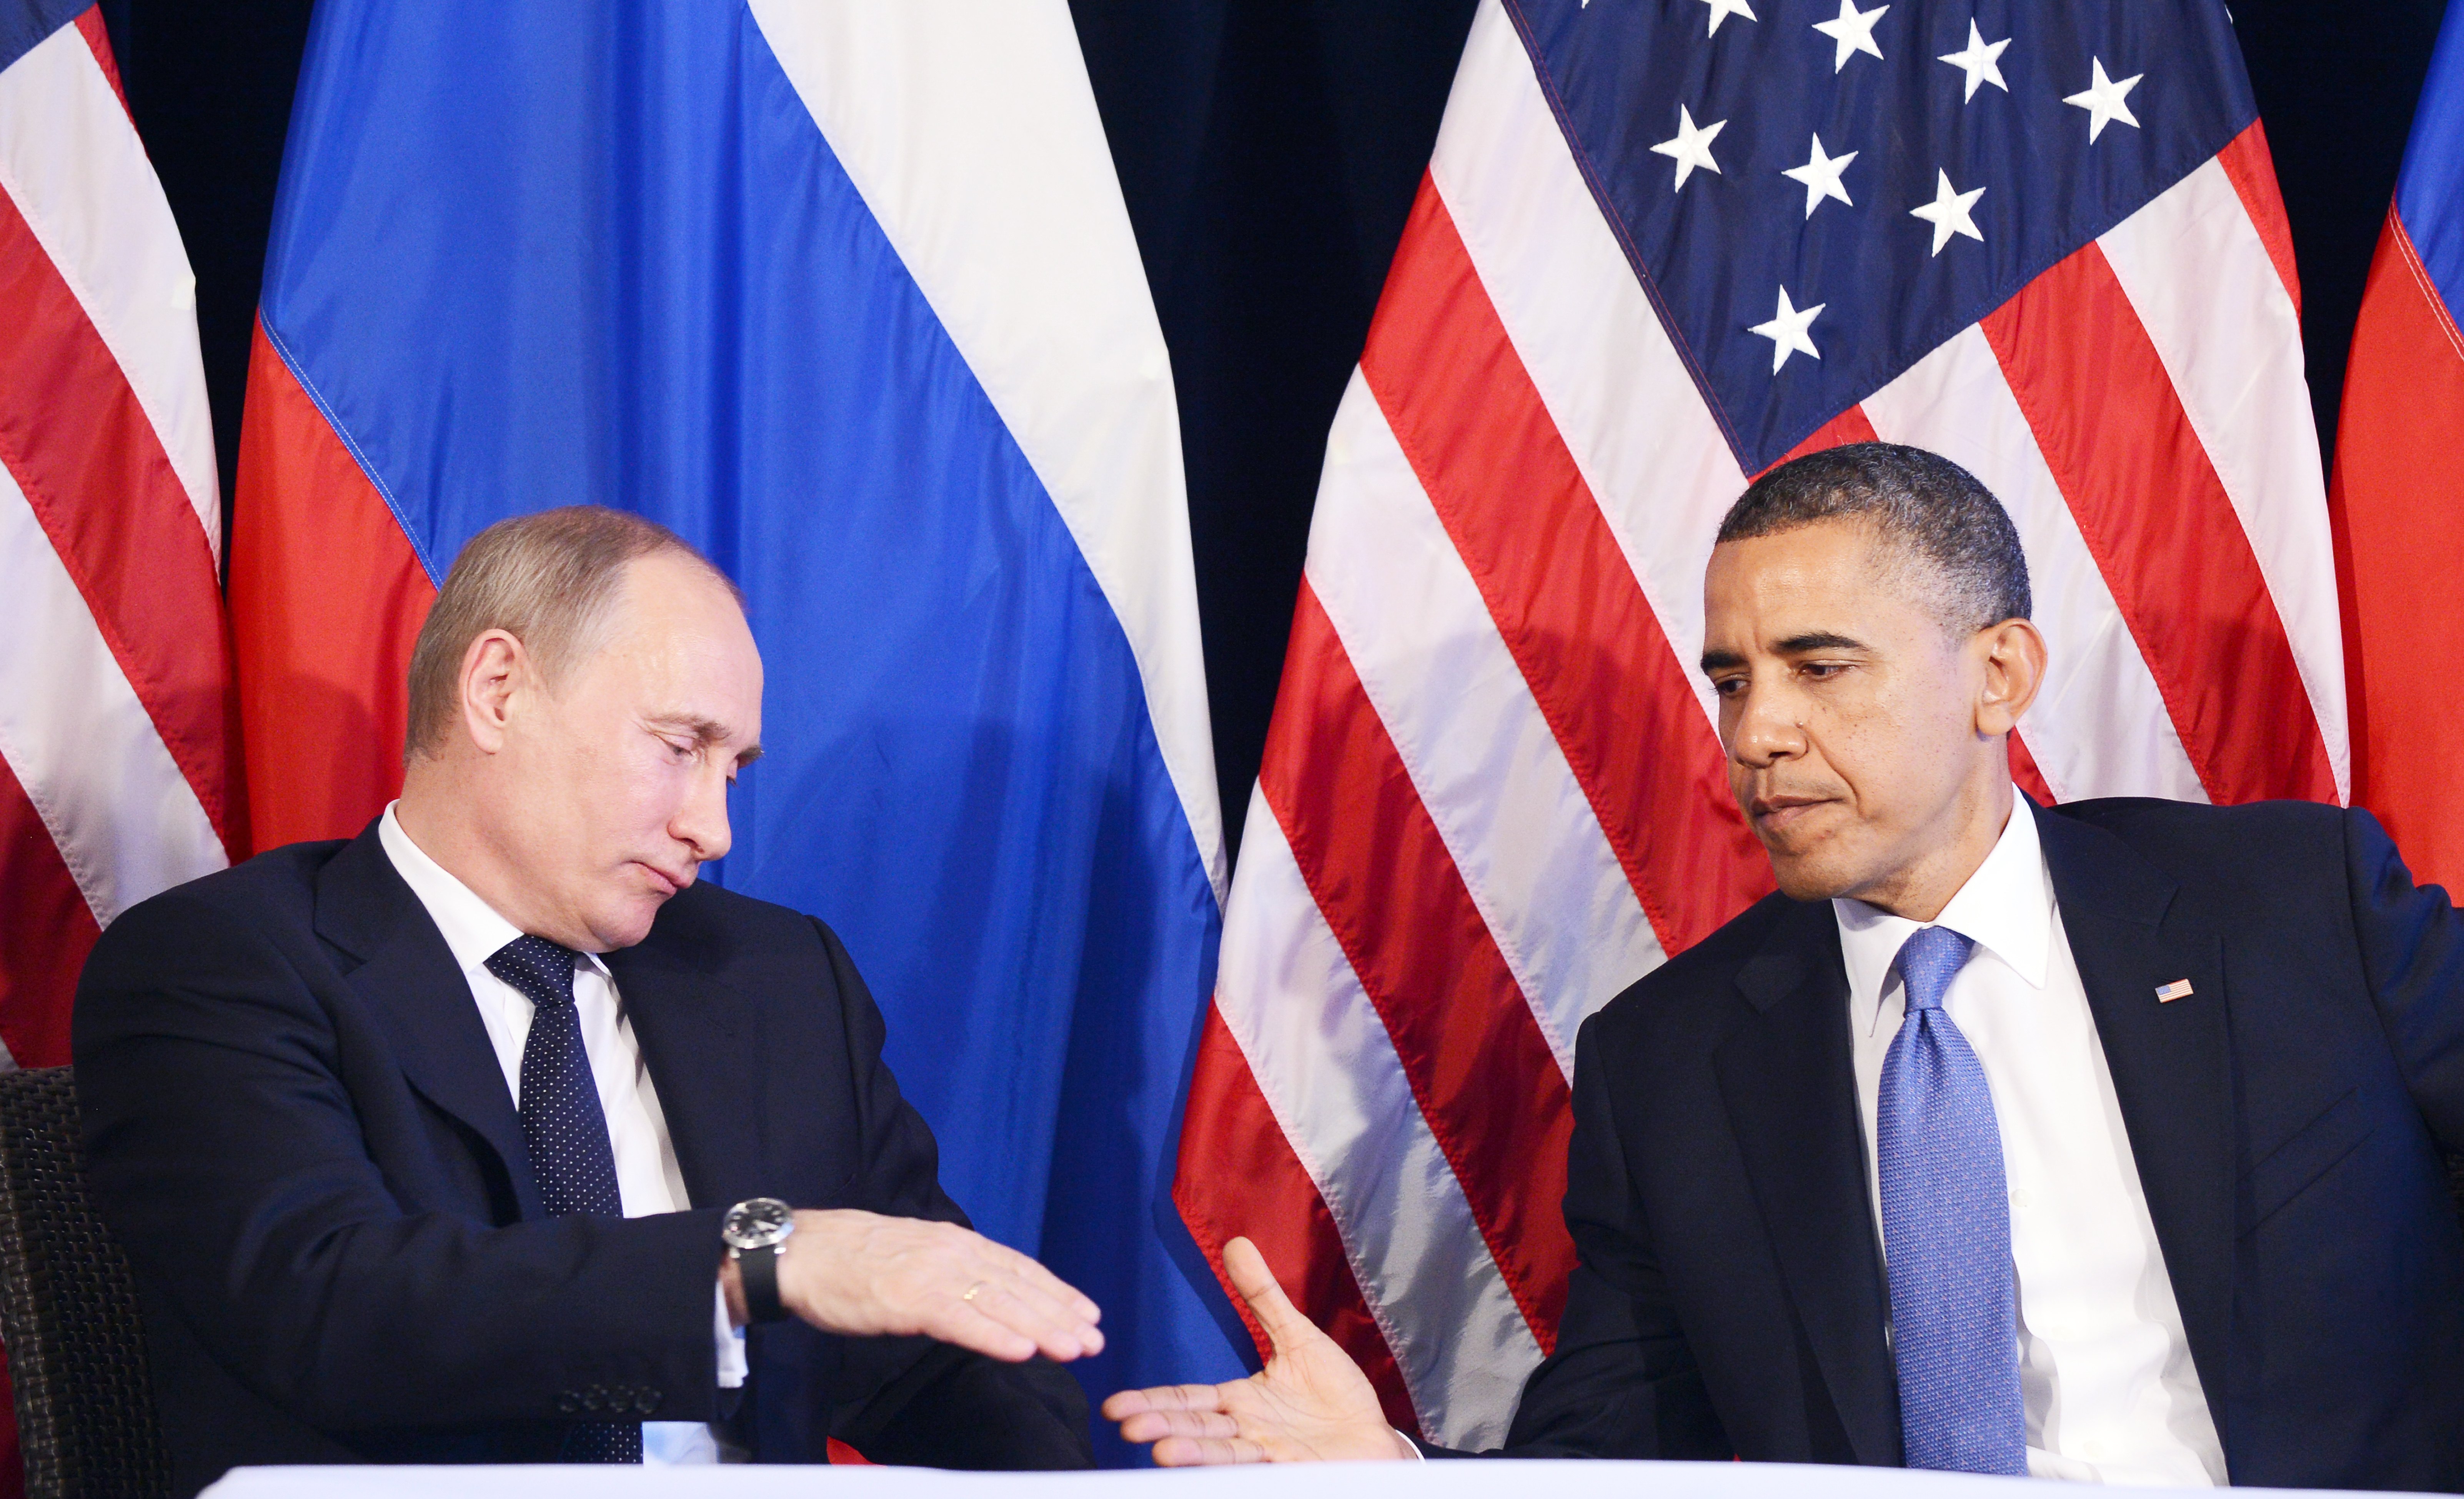 Obama: US, Russia deeply divided over Syria